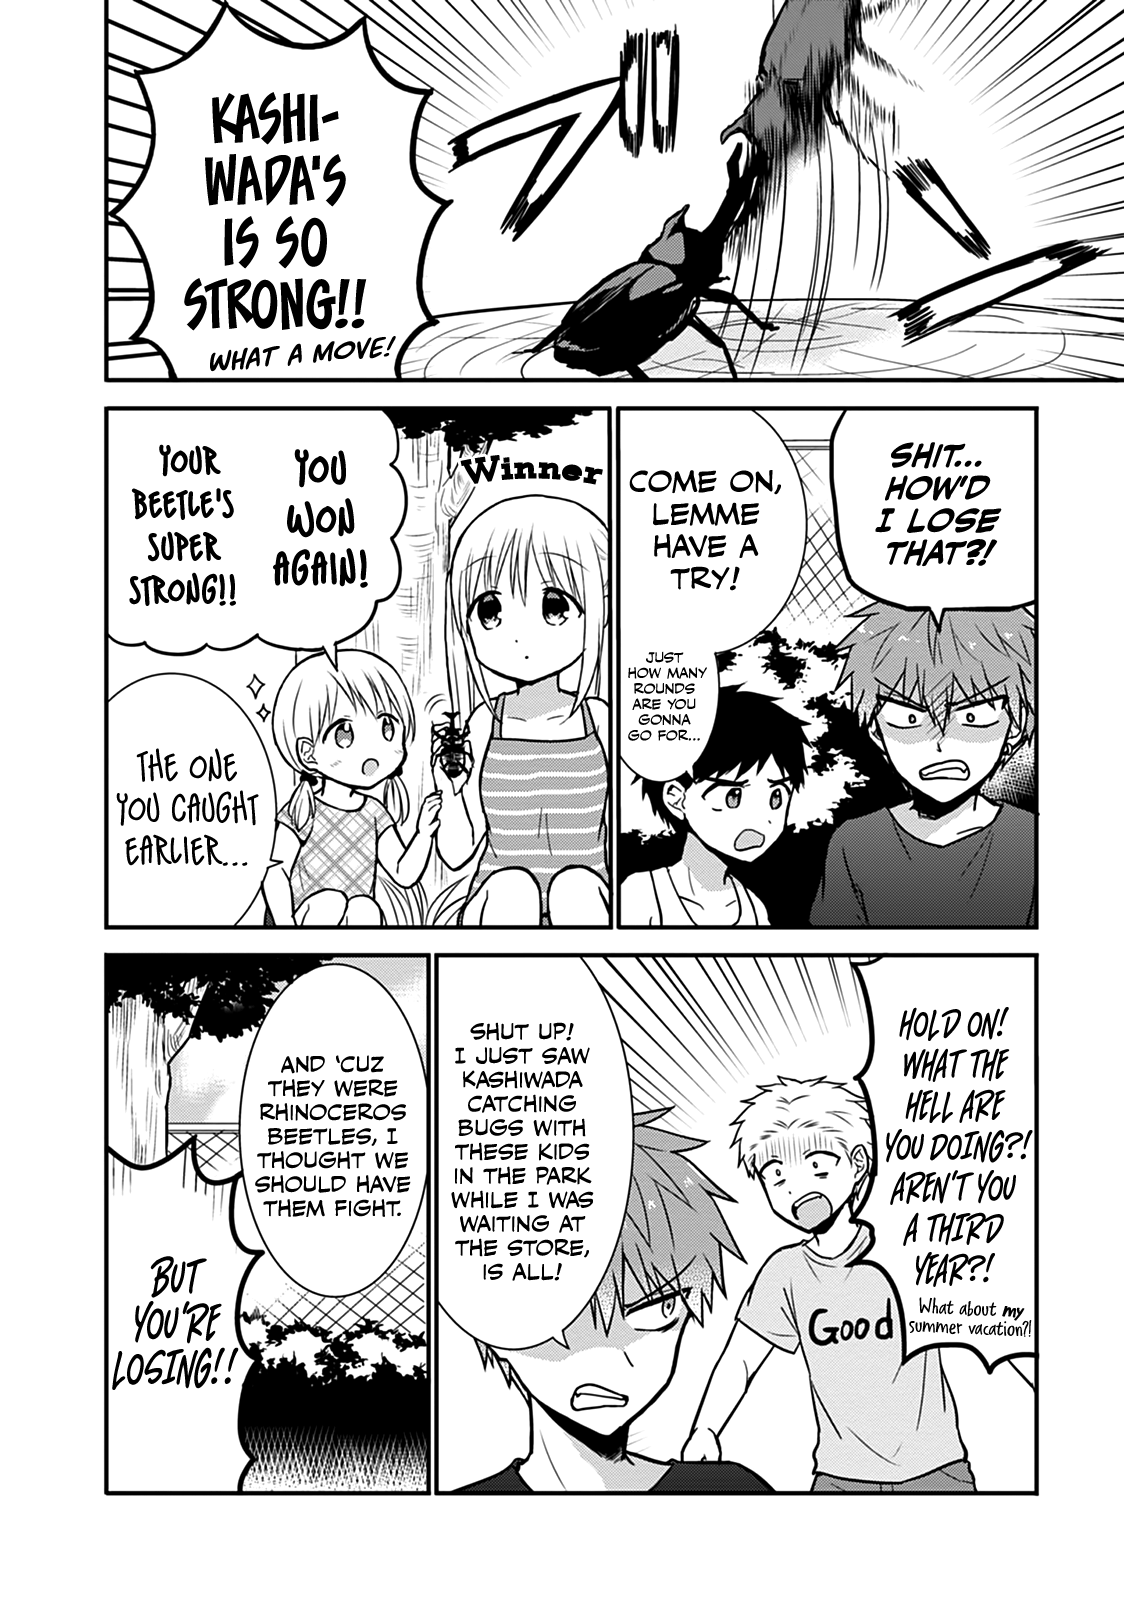 Expressionless Kashiwada-San And Emotional Oota-Kun Vol.3 Chapter 36: Kashiwada-San And Oota-Kun Catch Bugs - Picture 3